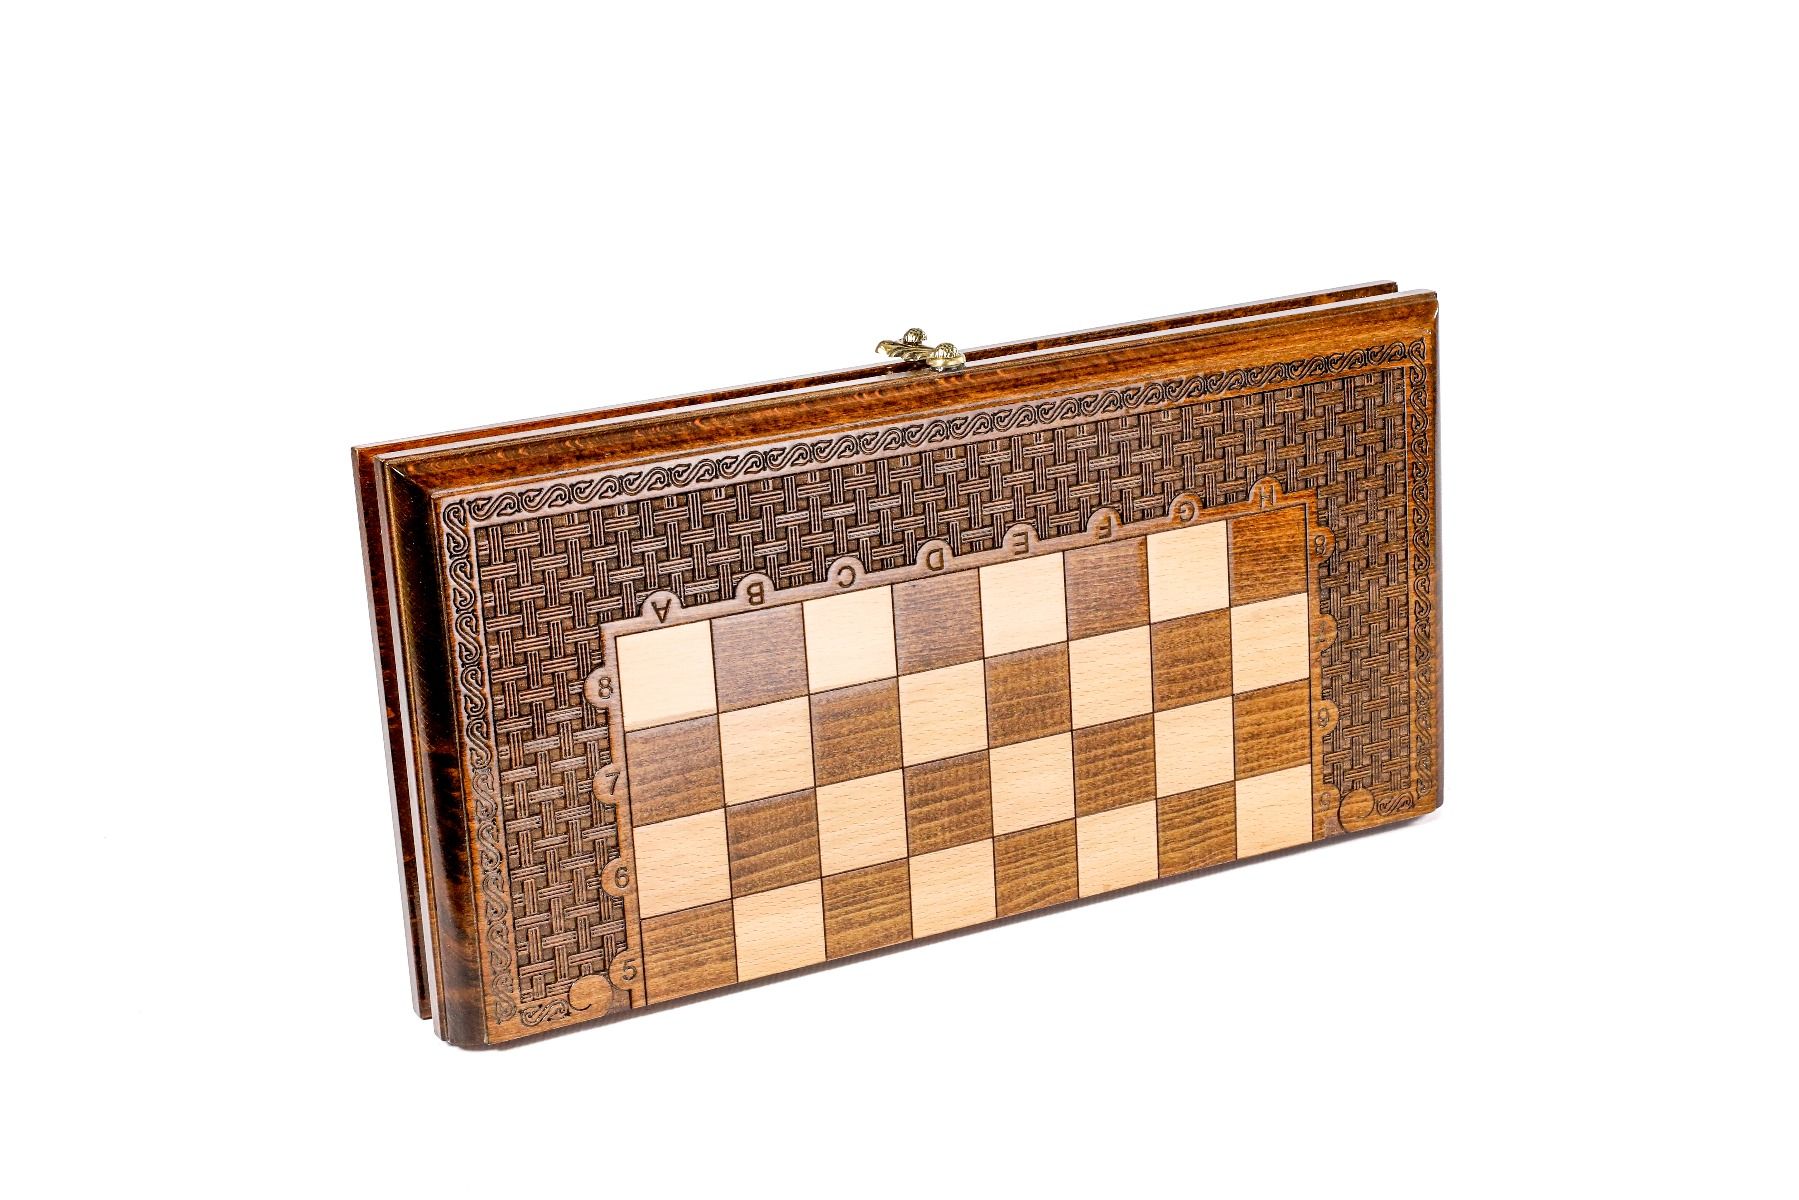 Celebrate the fusion of traditional gaming and craftsmanship with a set that offers the tactile pleasure and strategic diversity of chess and backgammon.